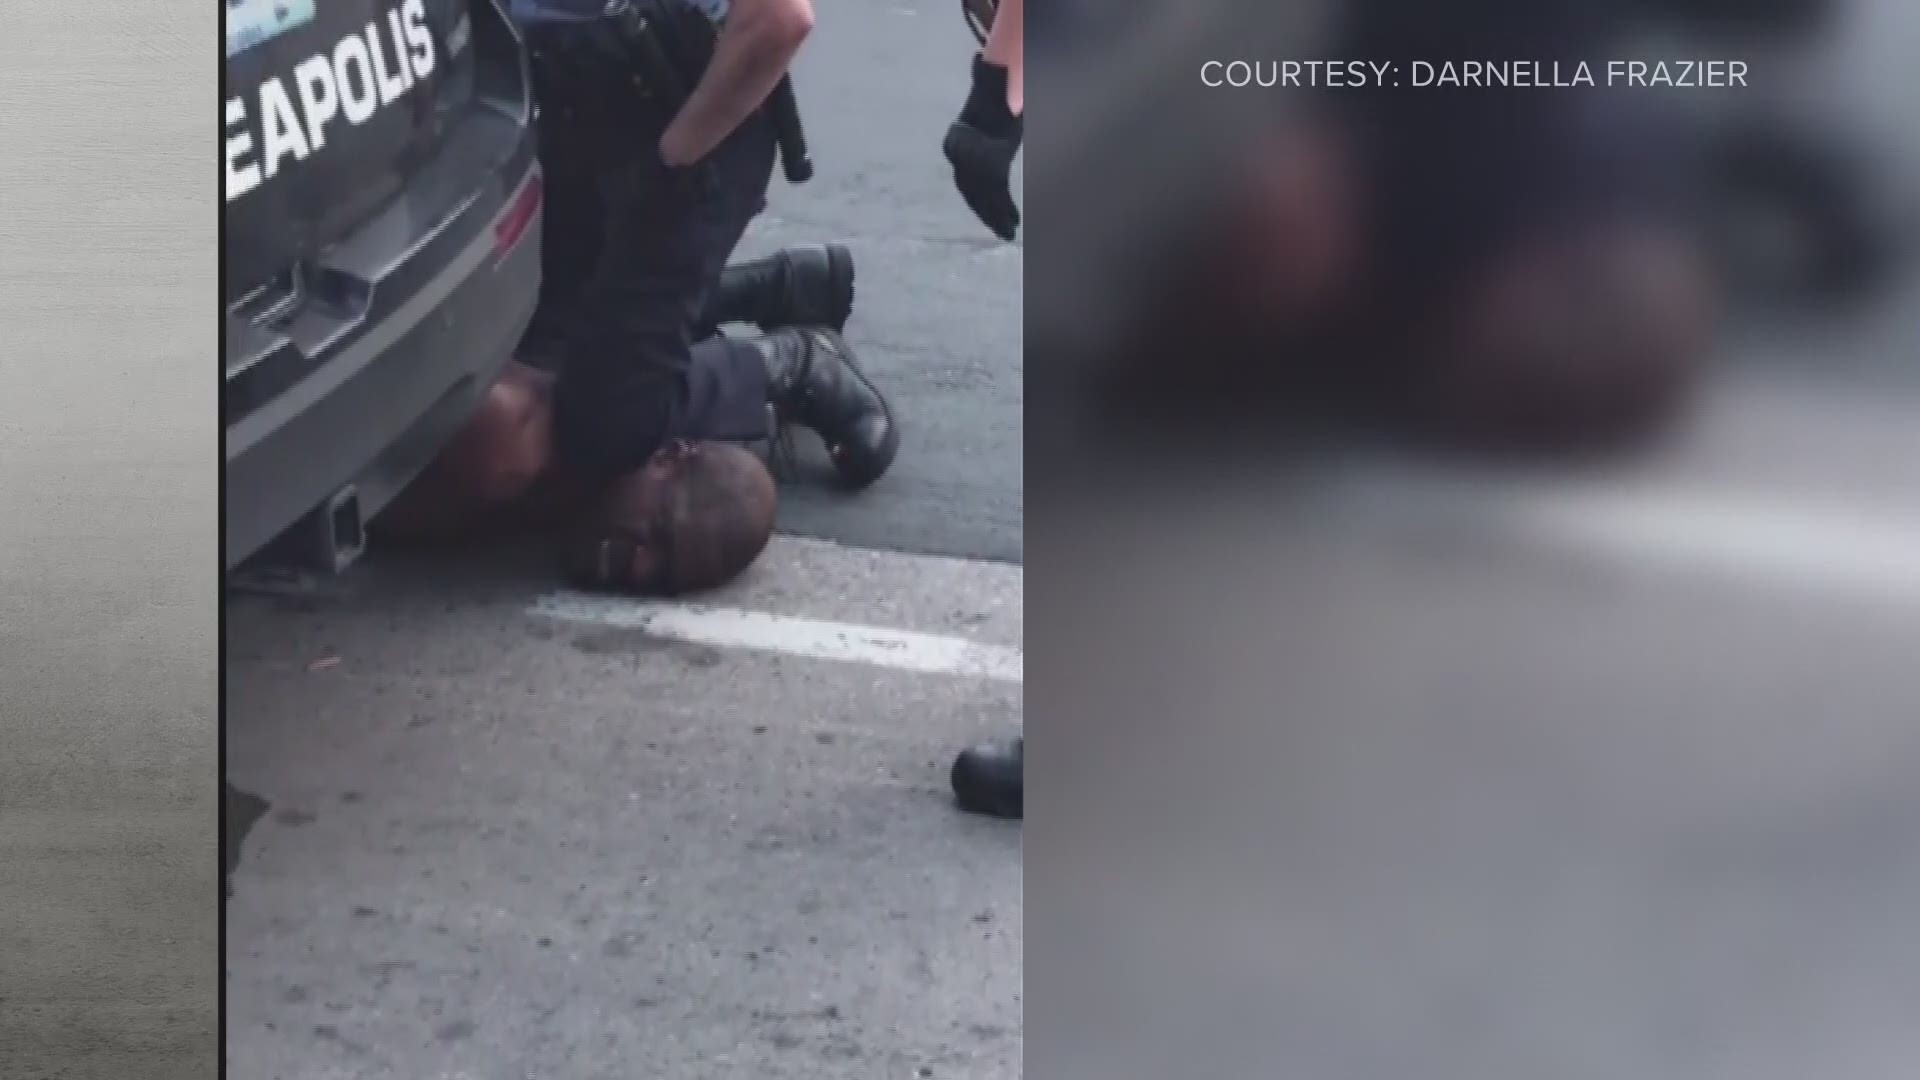 The video raises questions about a police press release, which claimed Floyd "physically resisted officers."